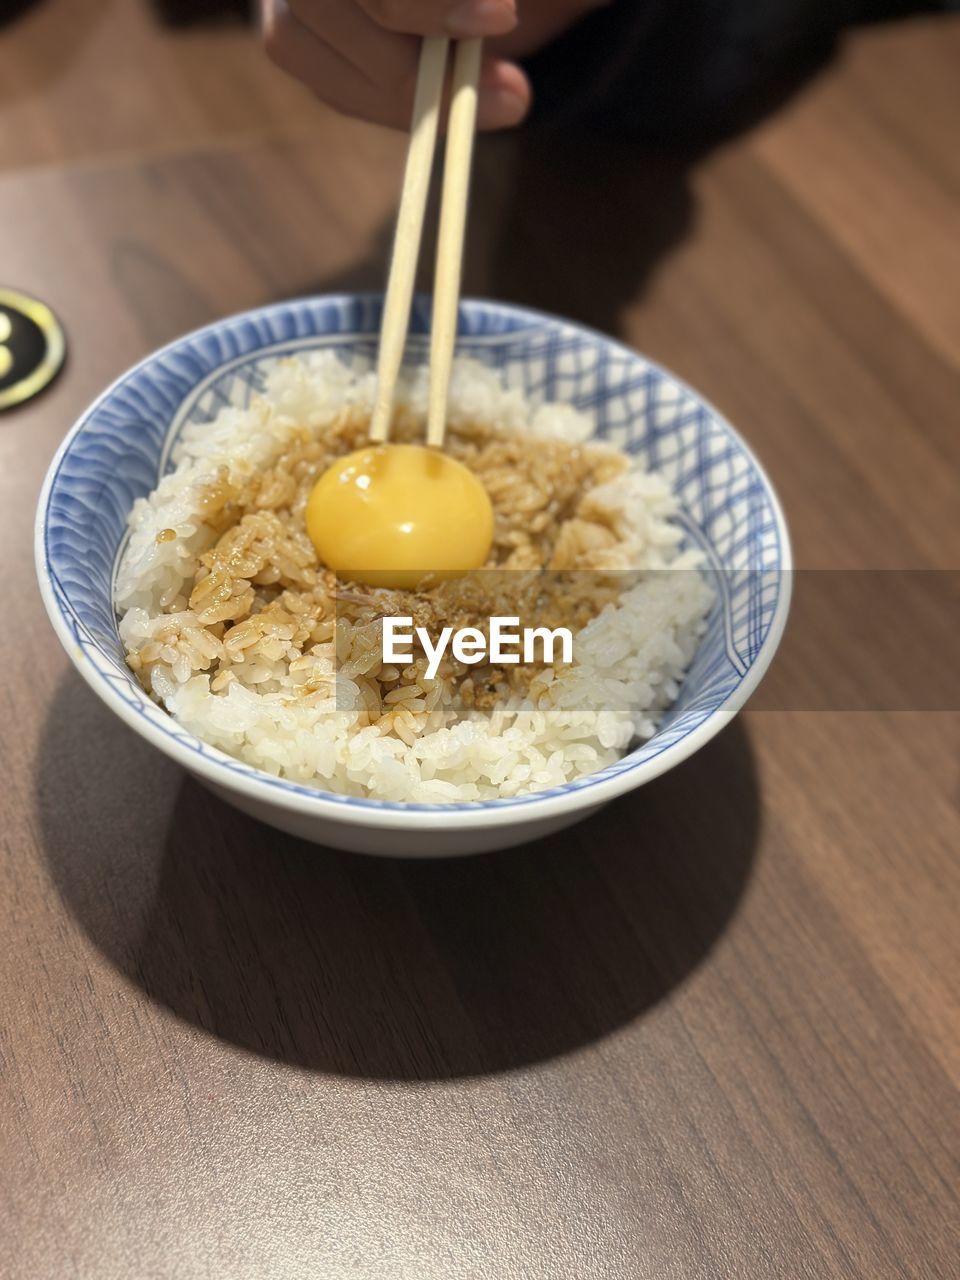 food and drink, food, dish, one person, indoors, hand, egg, bowl, meal, breakfast, freshness, healthy eating, wellbeing, table, kitchen utensil, high angle view, wood, holding, egg yolk, adult, produce, close-up, lifestyles, cuisine